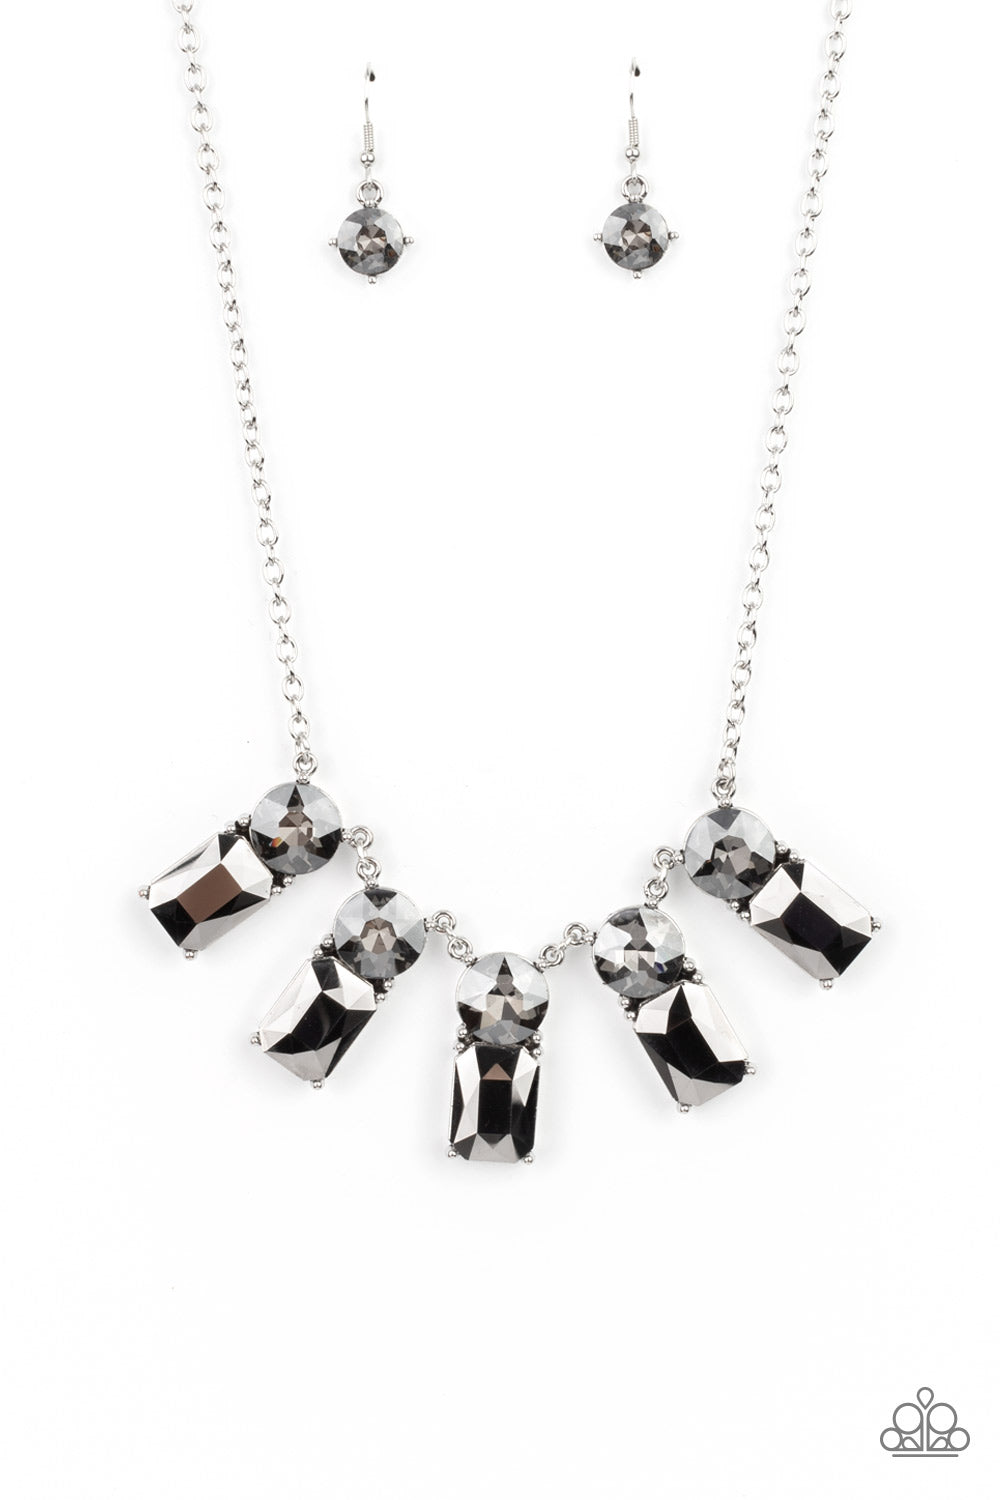 Celestial Royal Silver Necklace - Paparazzi Accessories  Featuring classic pronged fittings, a dramatic collection of oversized smoky rhinestones and emerald cut hematite gems fan out below the collar for an outrageous sparkle. Features an adjustable clasp closure.  All Paparazzi Accessories are lead free and nickel free!  Sold as one individual necklace. Includes one pair of matching earrings.